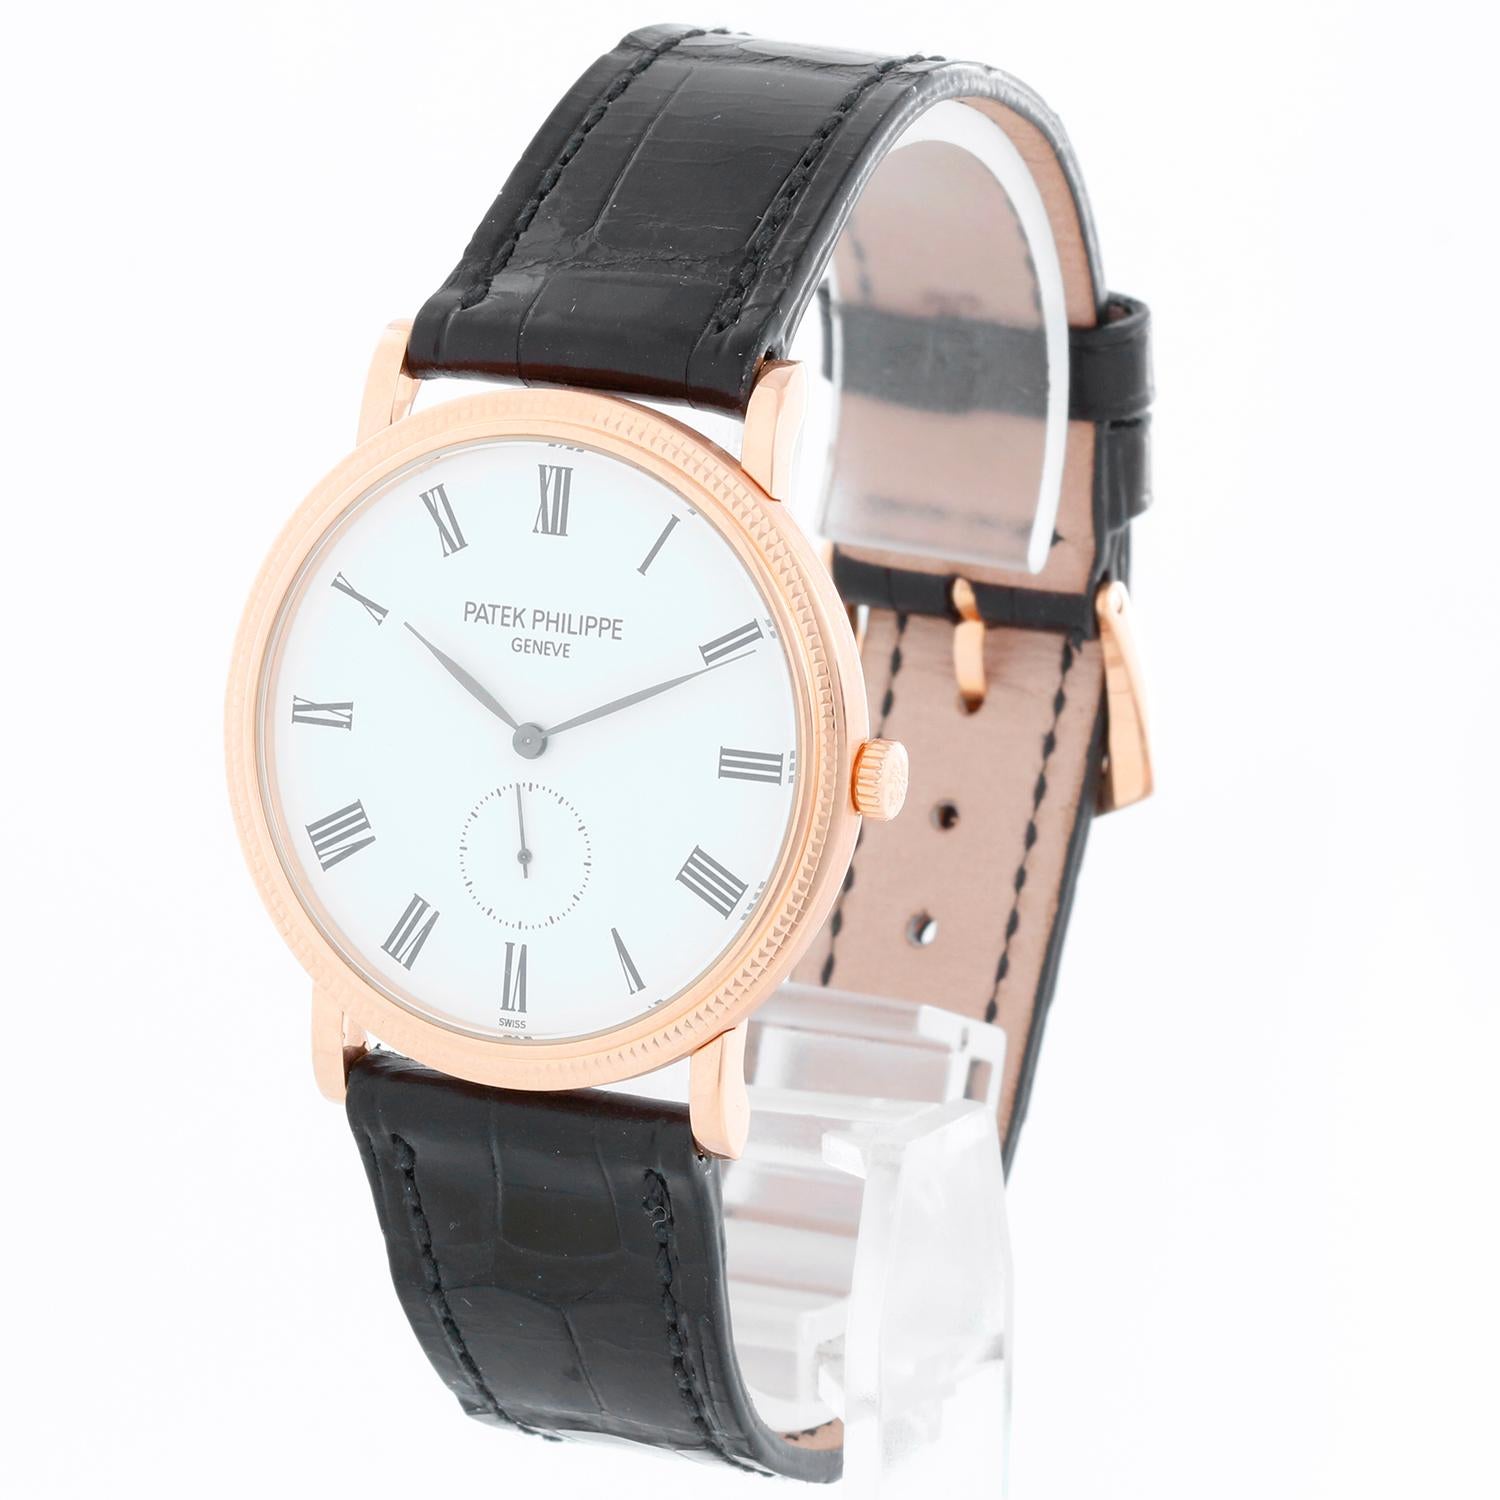 Patek Philippe Calatrava 18k Rose Gold Men's Watch  5119-R (or 5119R) - Manual winding. 18k rose gold case with hobnail bezel and exposition back (36mm diameter). White dial with black Roman numerals; subseconds at 6 o'clock. Patek Philippe strap